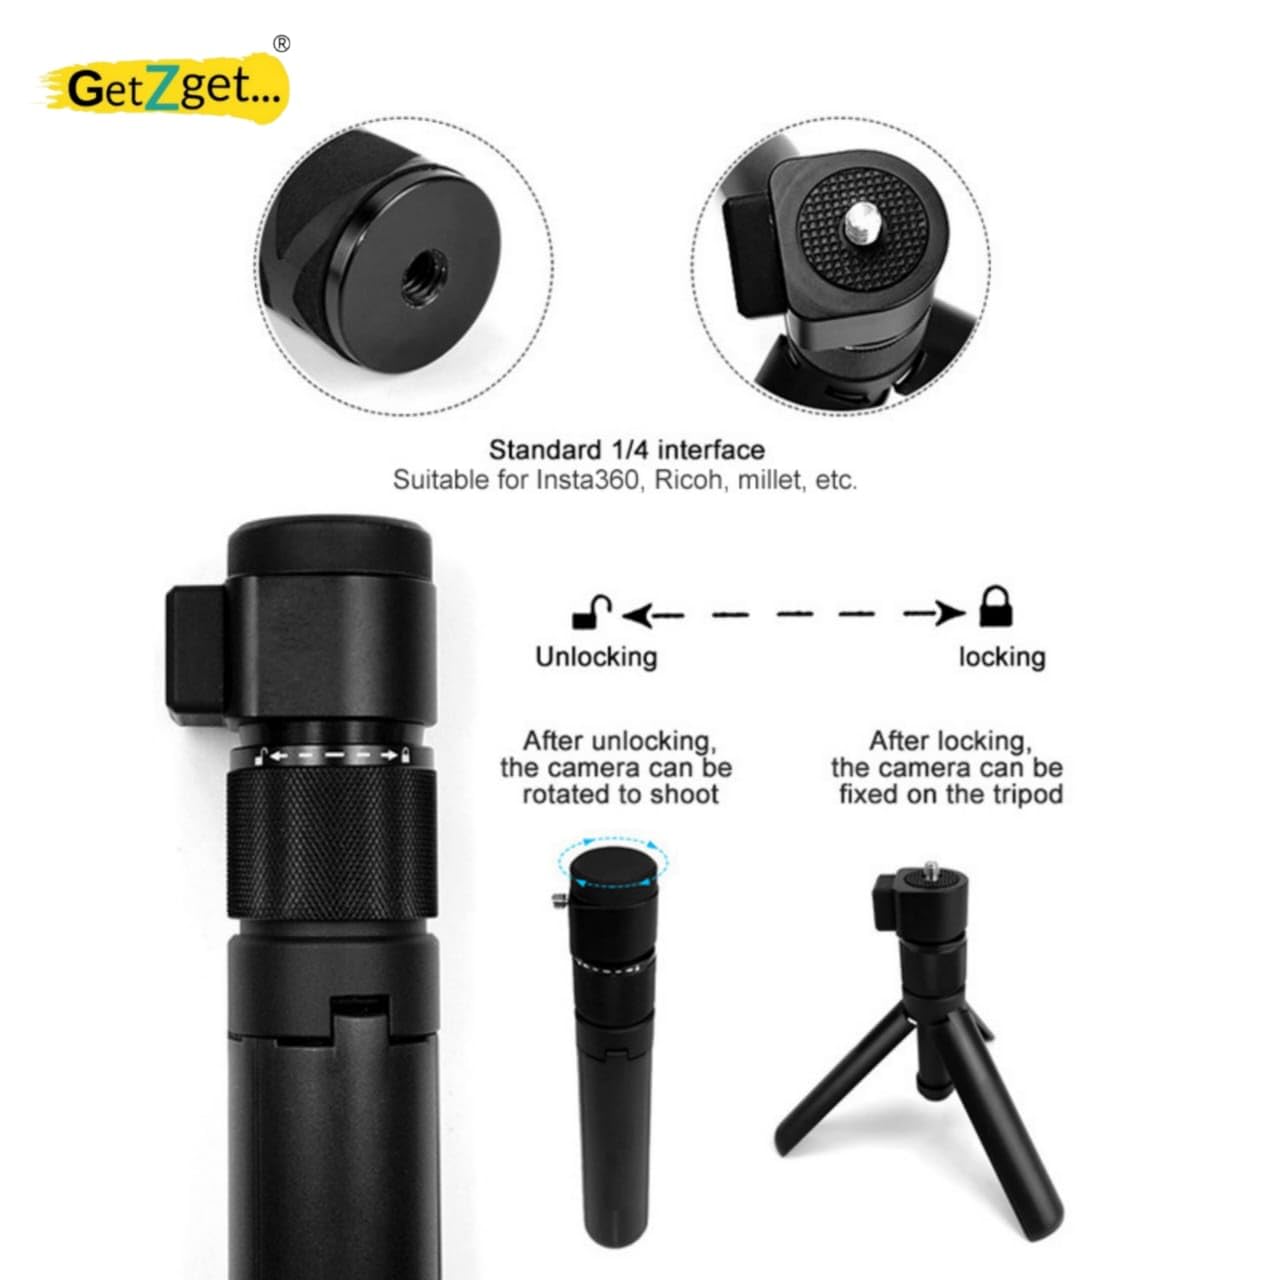 Bullet Time Handle for Insta360 and Action Cameras  360° Rotatable Tripod Stand  One X4, X3, X2 Series 